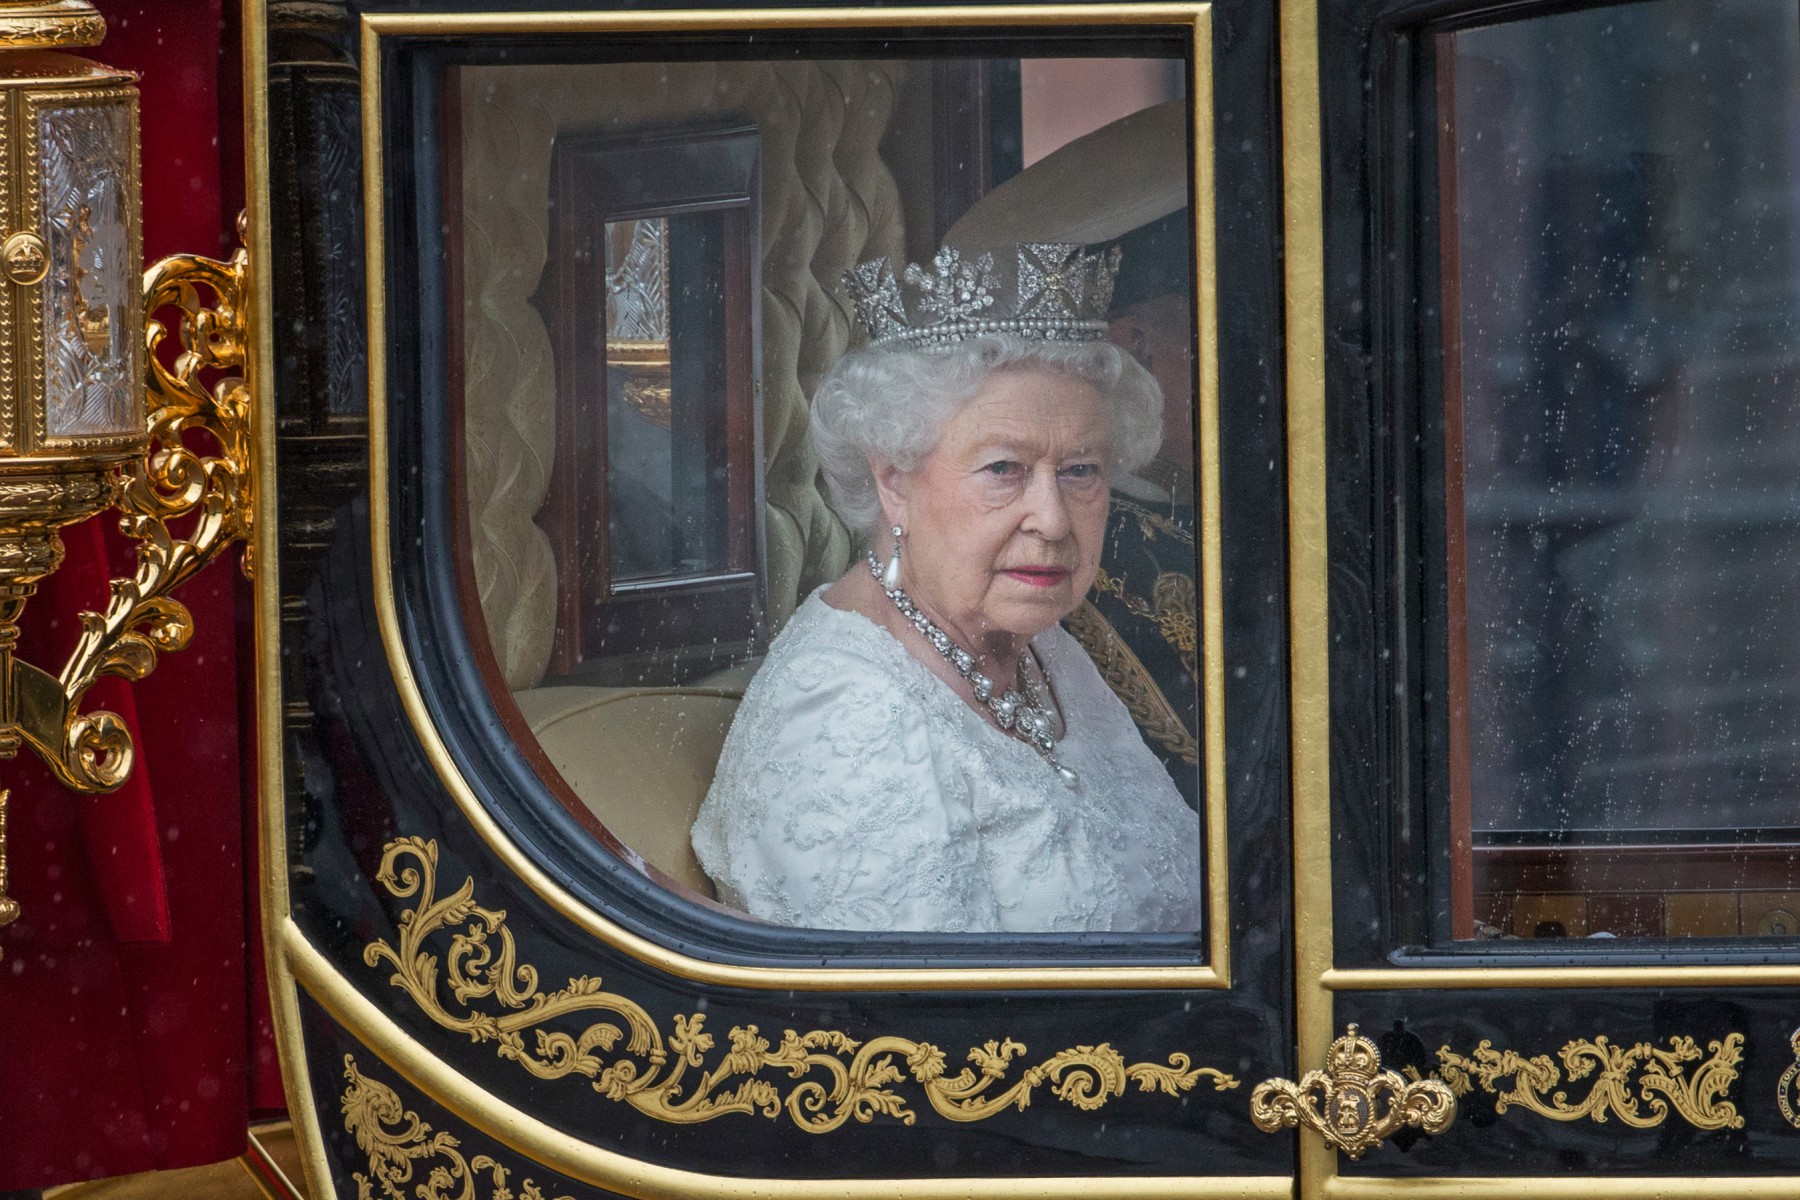 The Queen will delay her Christmas at Sandringham if Boris Johnson wins the election 